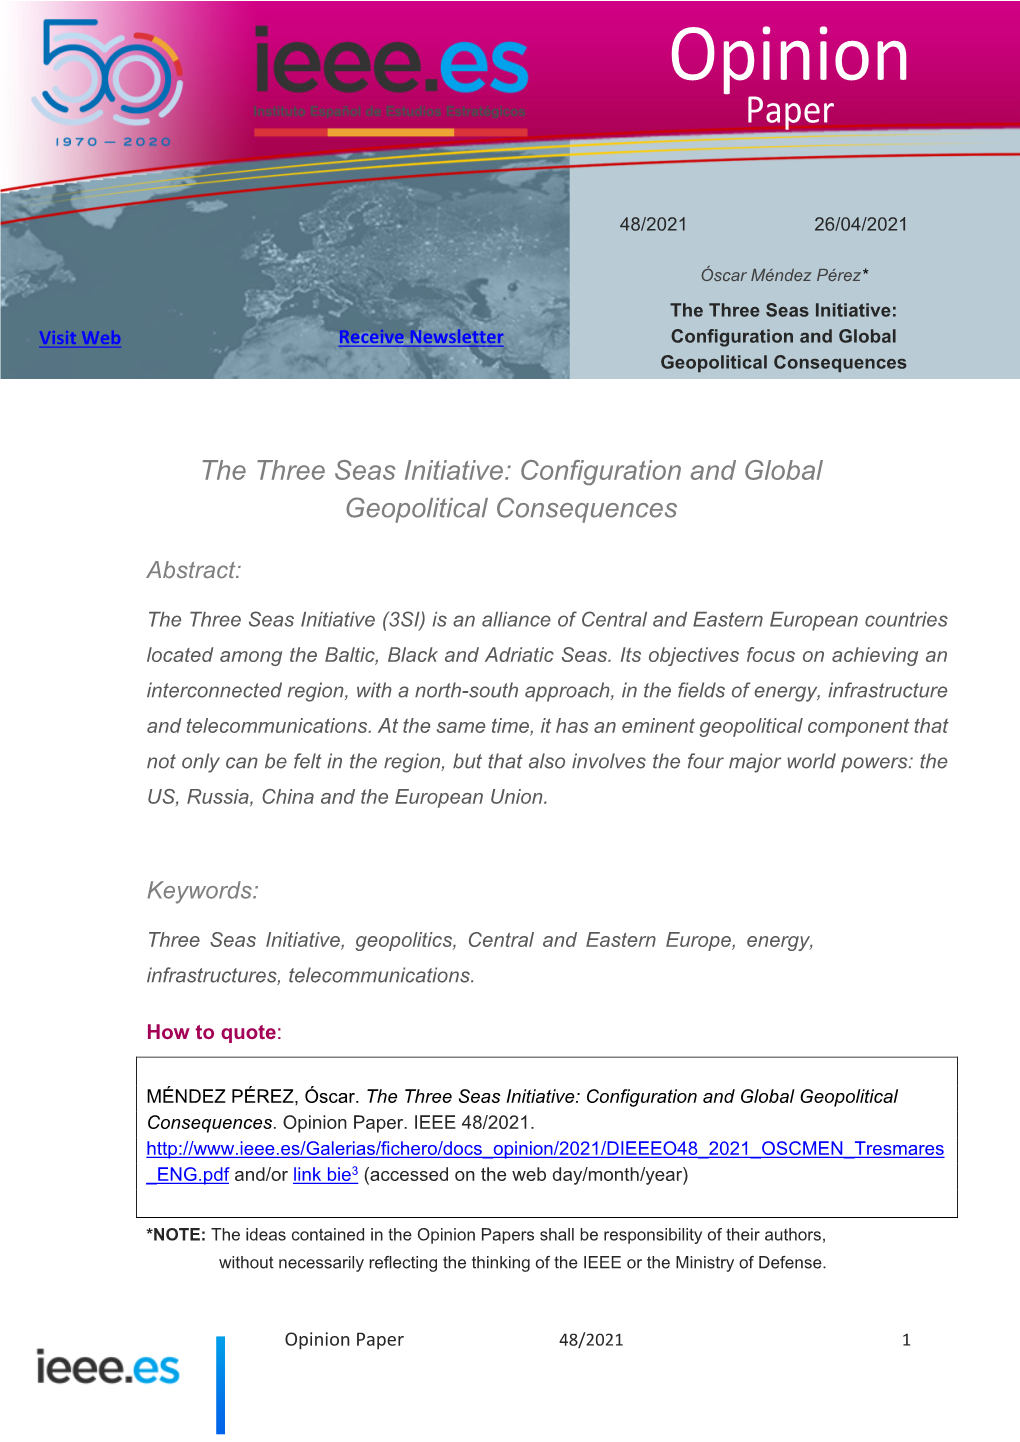 The Three Seas Initiative: Configuration and Global Geopolitical Consequences